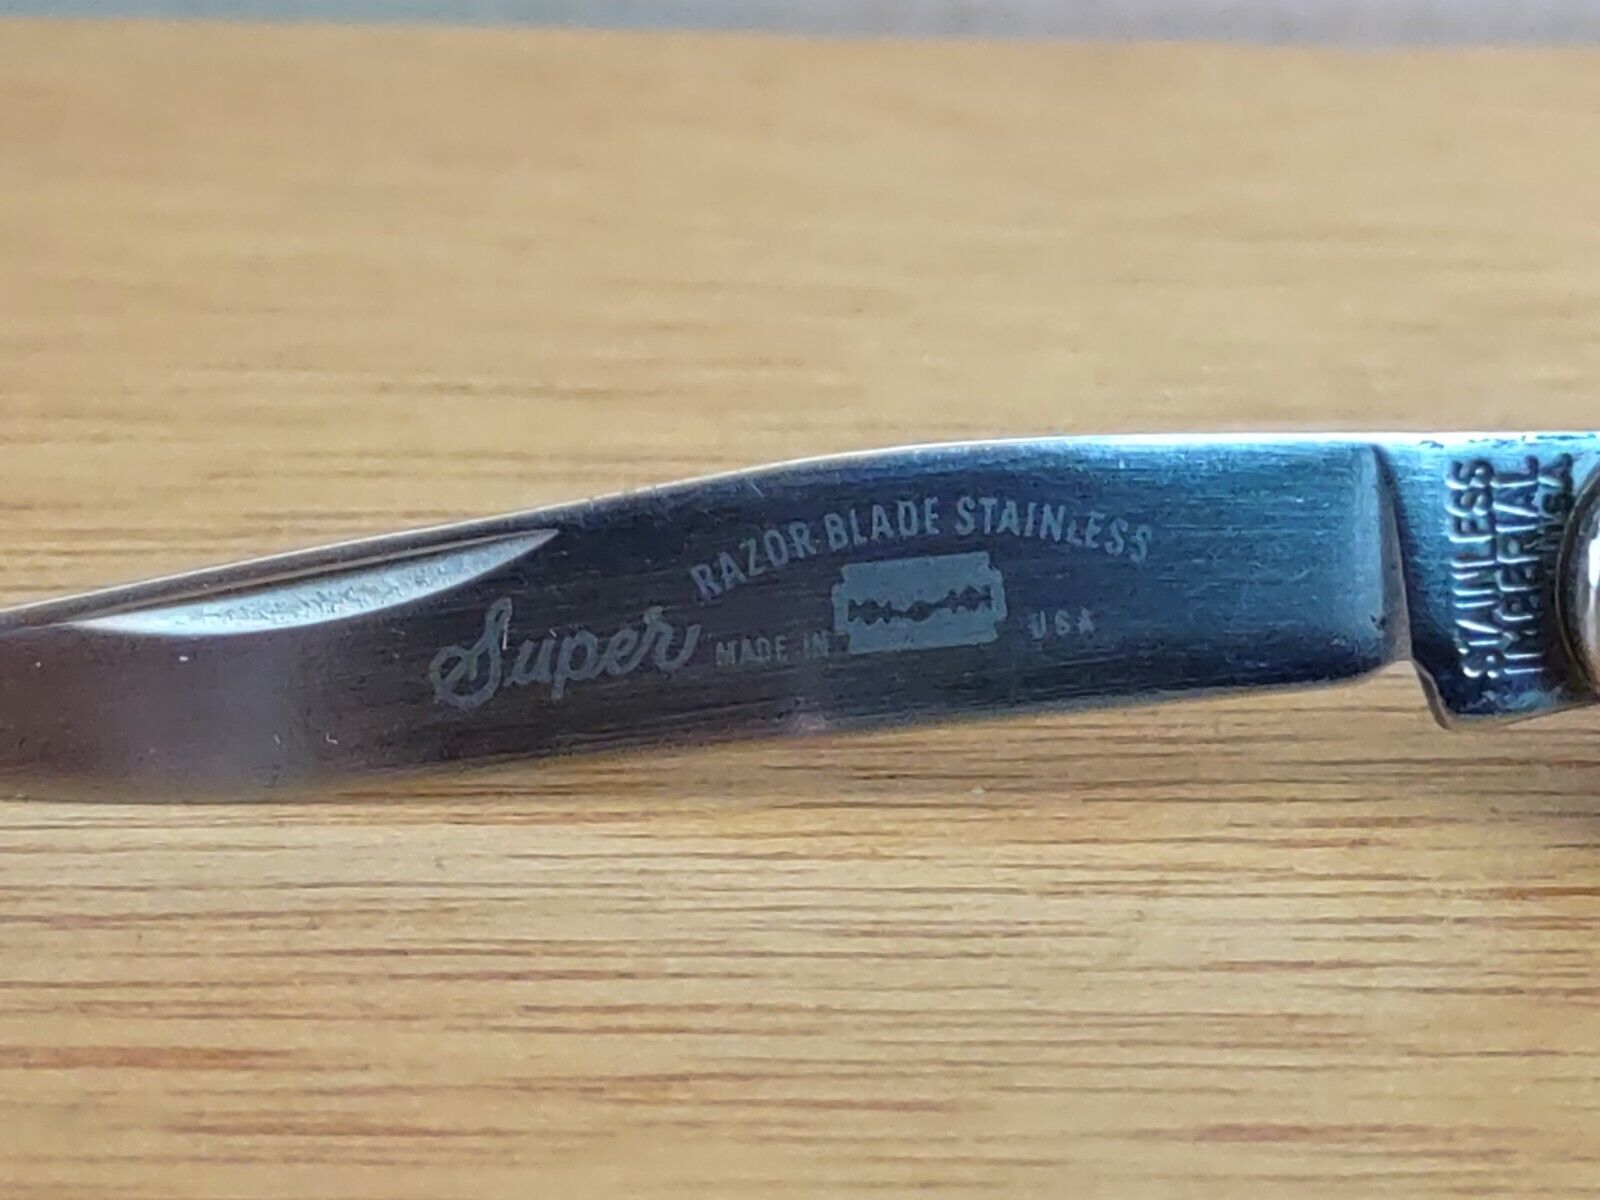 Vintage Imperial Razor Blade Stainless Steel Knife, Two Blade, Celluloid Handle